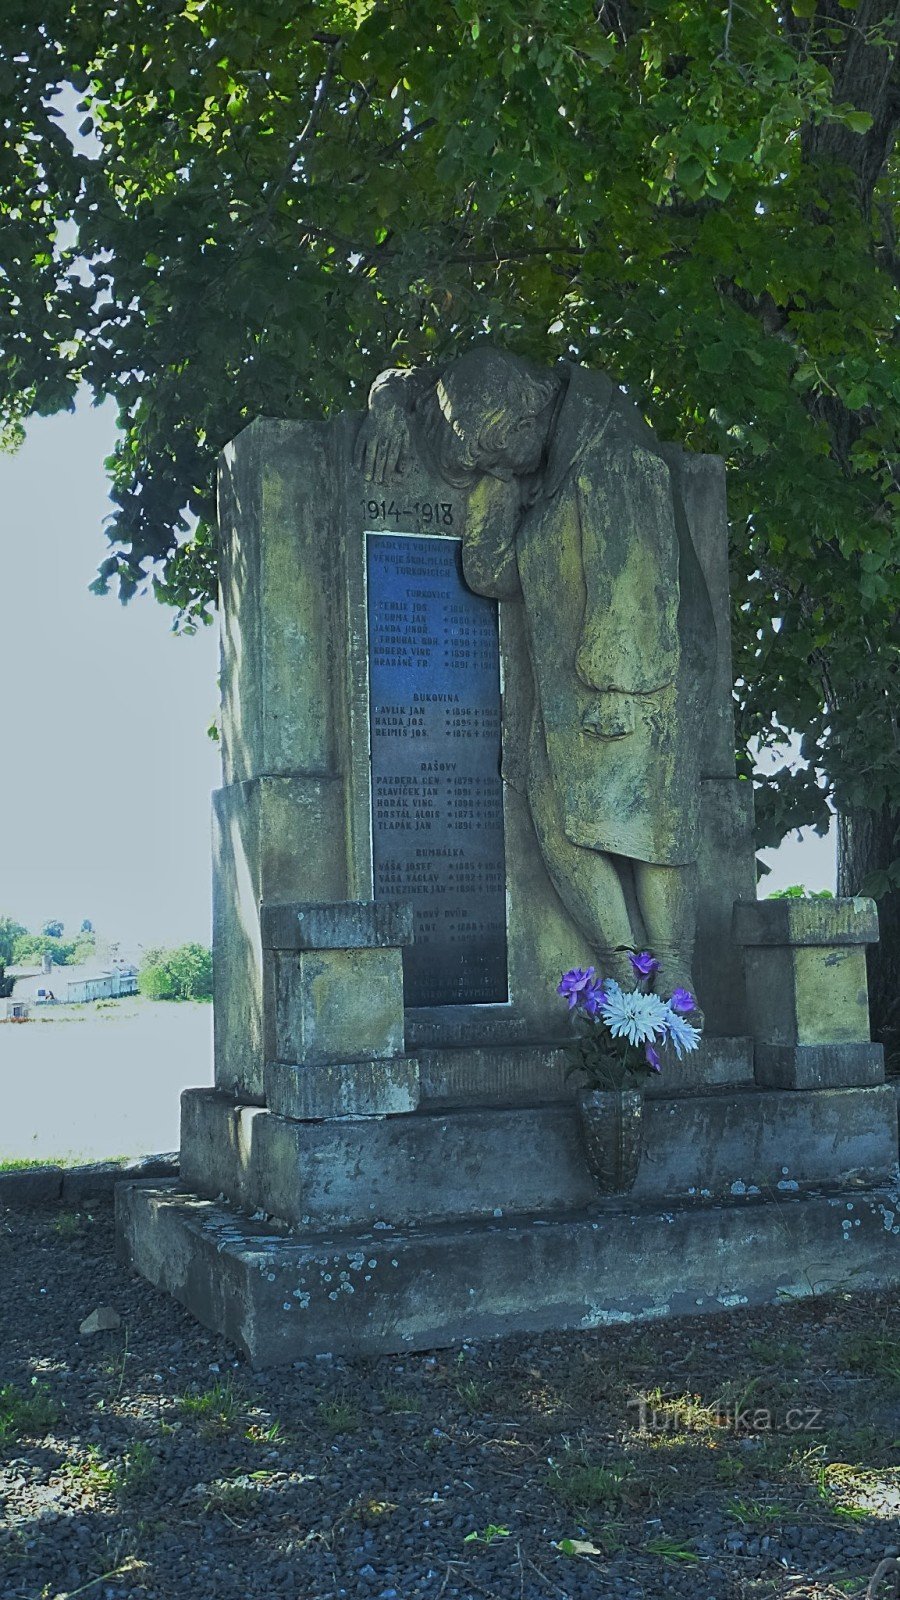 19 names of fallen soldiers from the surrounding villages are engraved on the monument